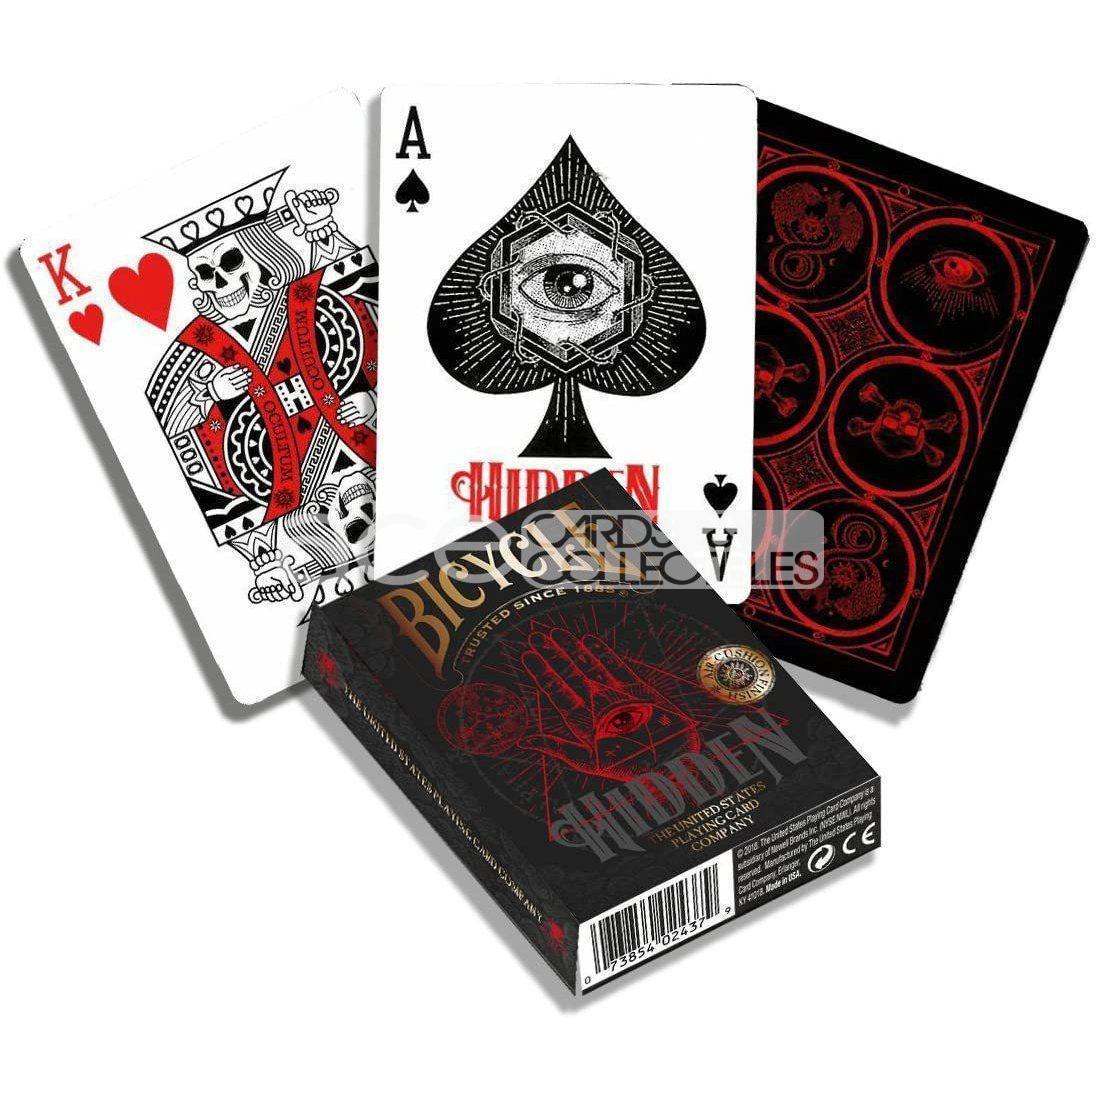 Bicycle Hidden Playing Cards-United States Playing Cards Company-Ace Cards &amp; Collectibles